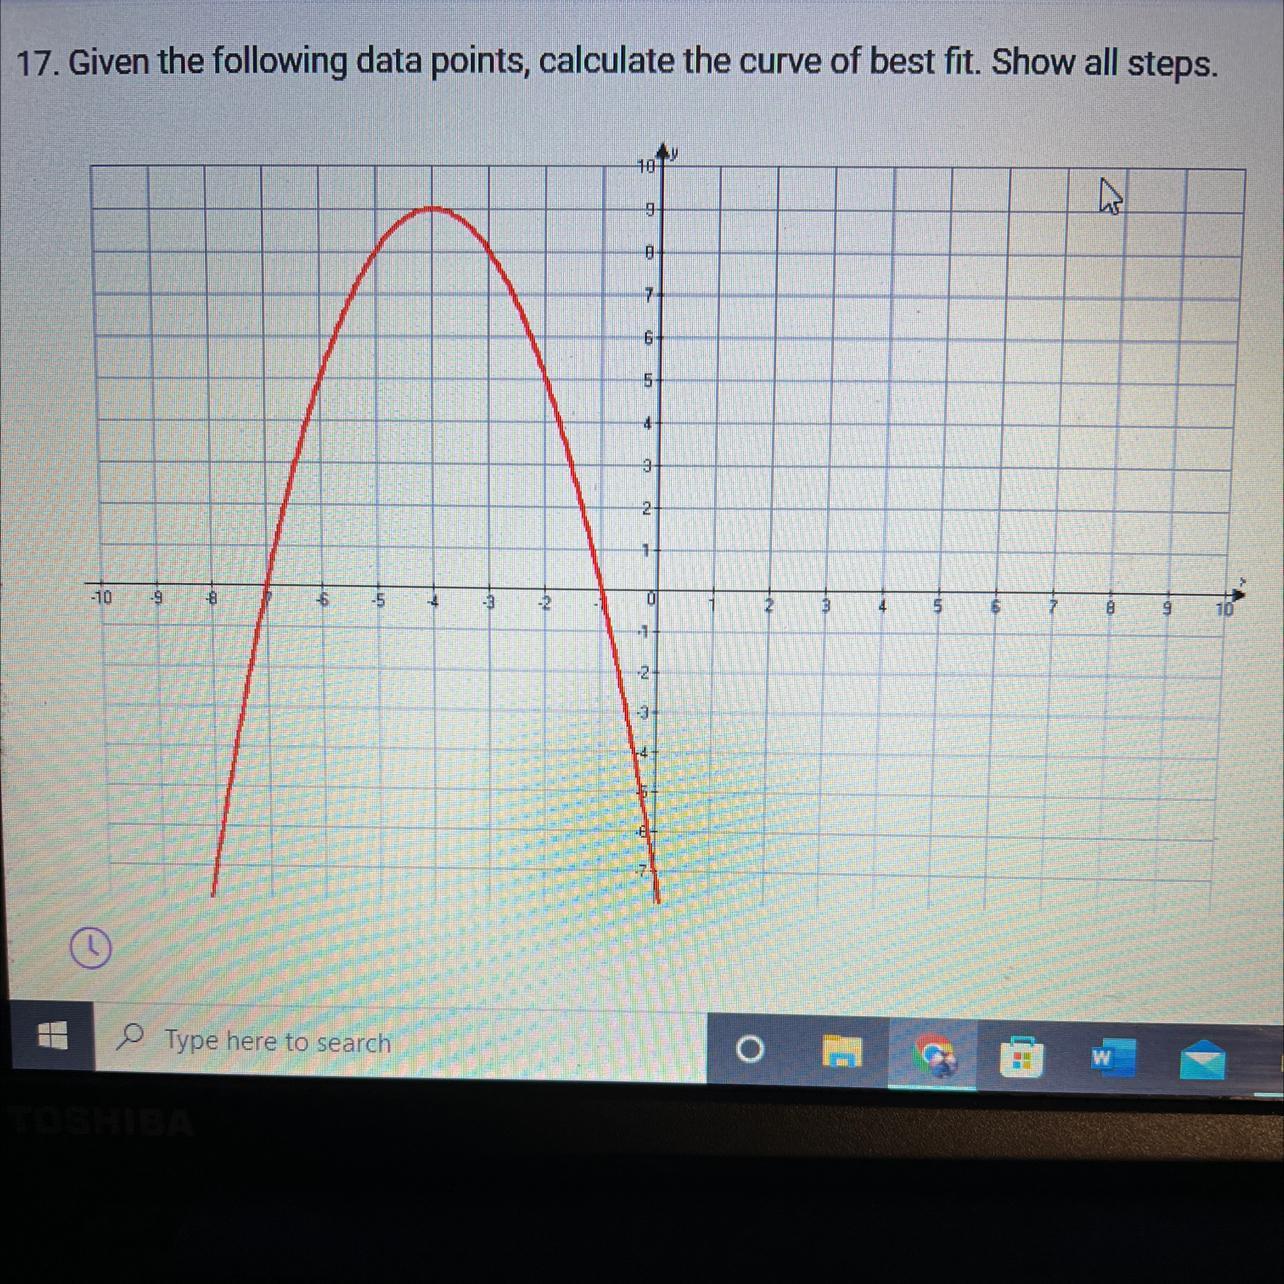 How Do I Do I Calculate The Curve Of Best Fit With The Following Data Points Given?